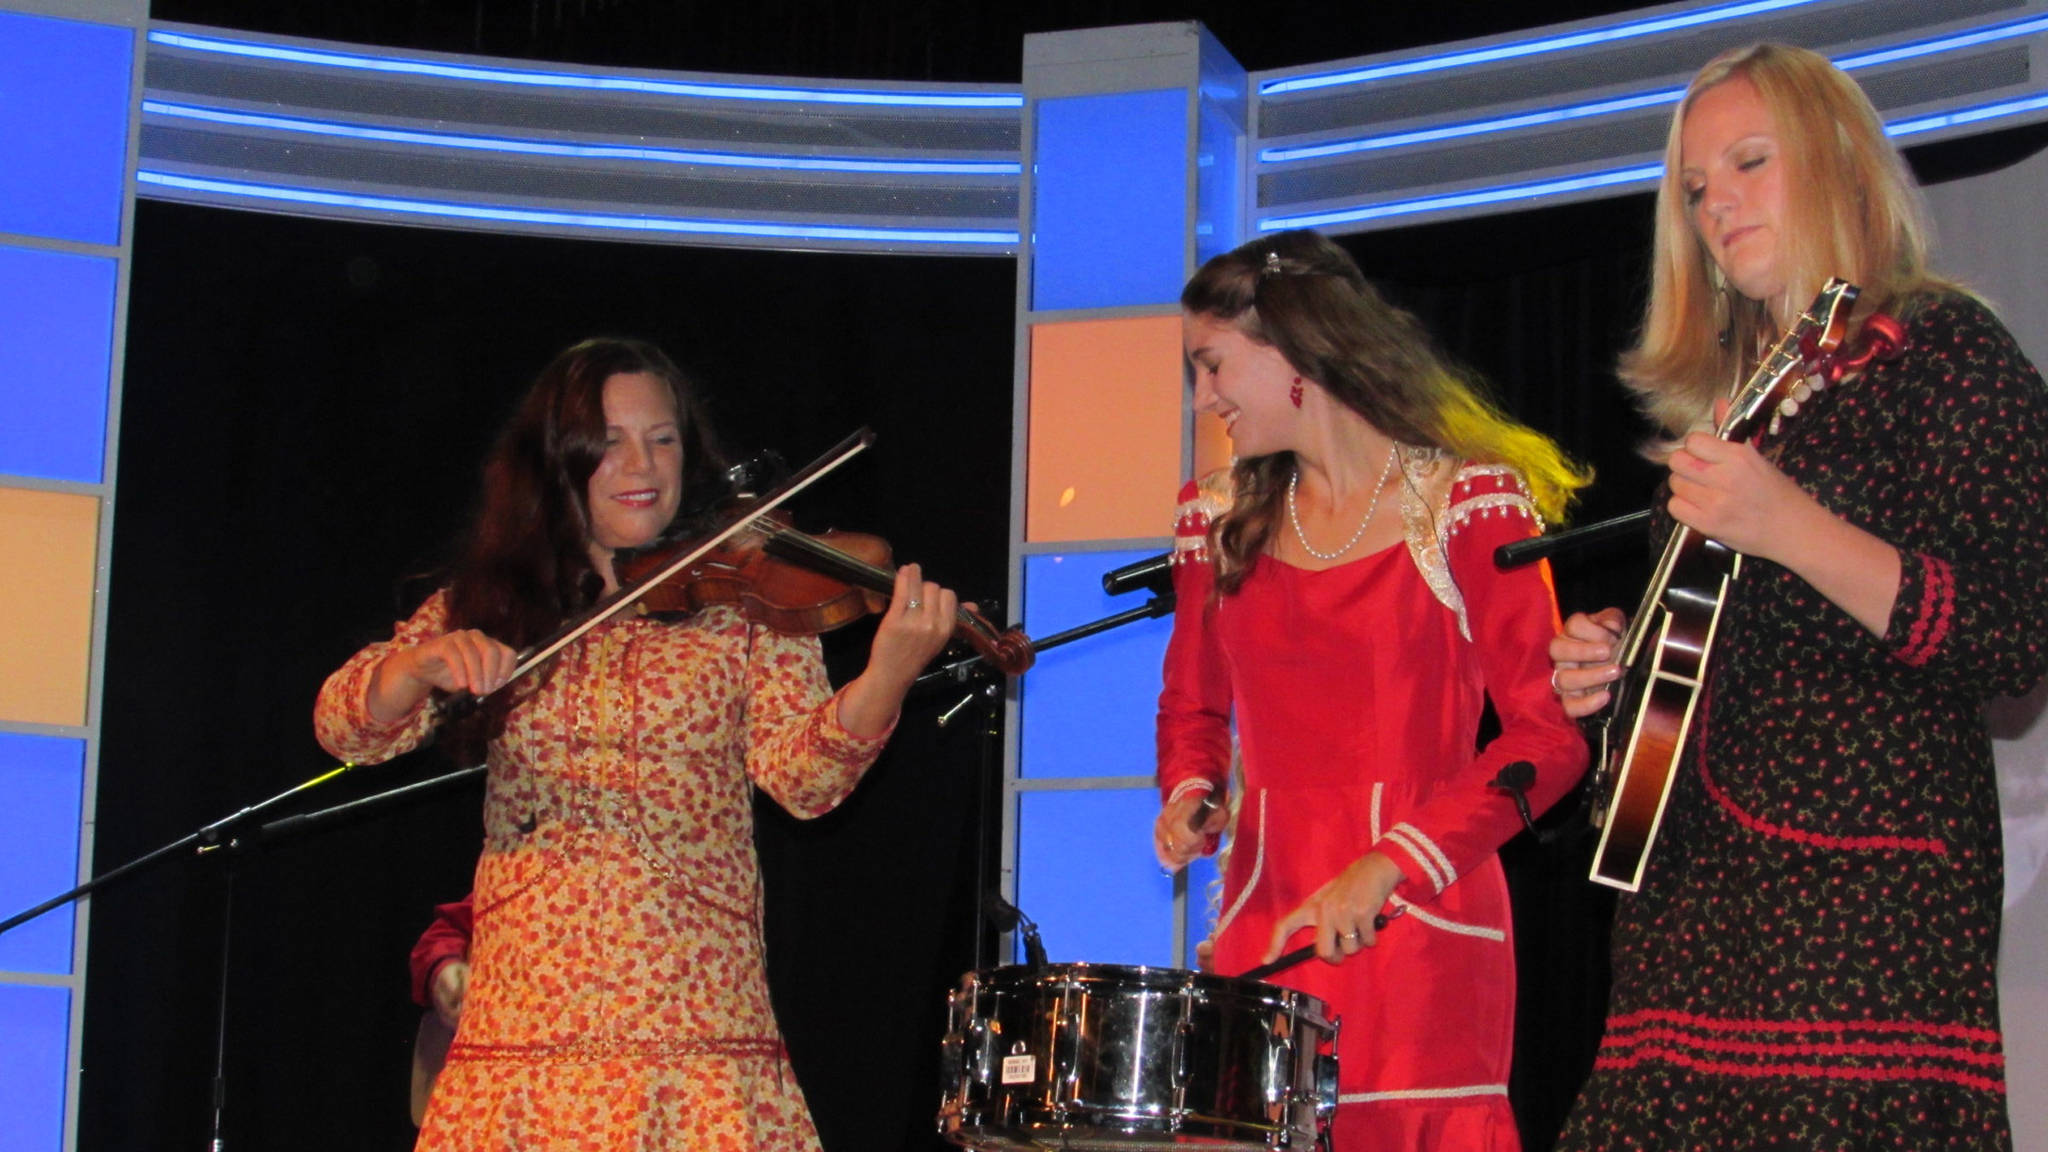 Melissa Zahasky, Emily Zahasky and Laura Zahasky of the Alaska String Band perform onboard the Silver Shadow cruise ship in Juneau. The six-member Americana band consists of members of the Zahasky family and splits the year between playing cruise ships in Juneau during the summer and touring in the winter. Recently, the Alaska String Band celebrated the Fourth of July by performing for the U.S. Embassy in Vladivostok, Russia. (Ben Hohenstatt | Capital City Weekly)